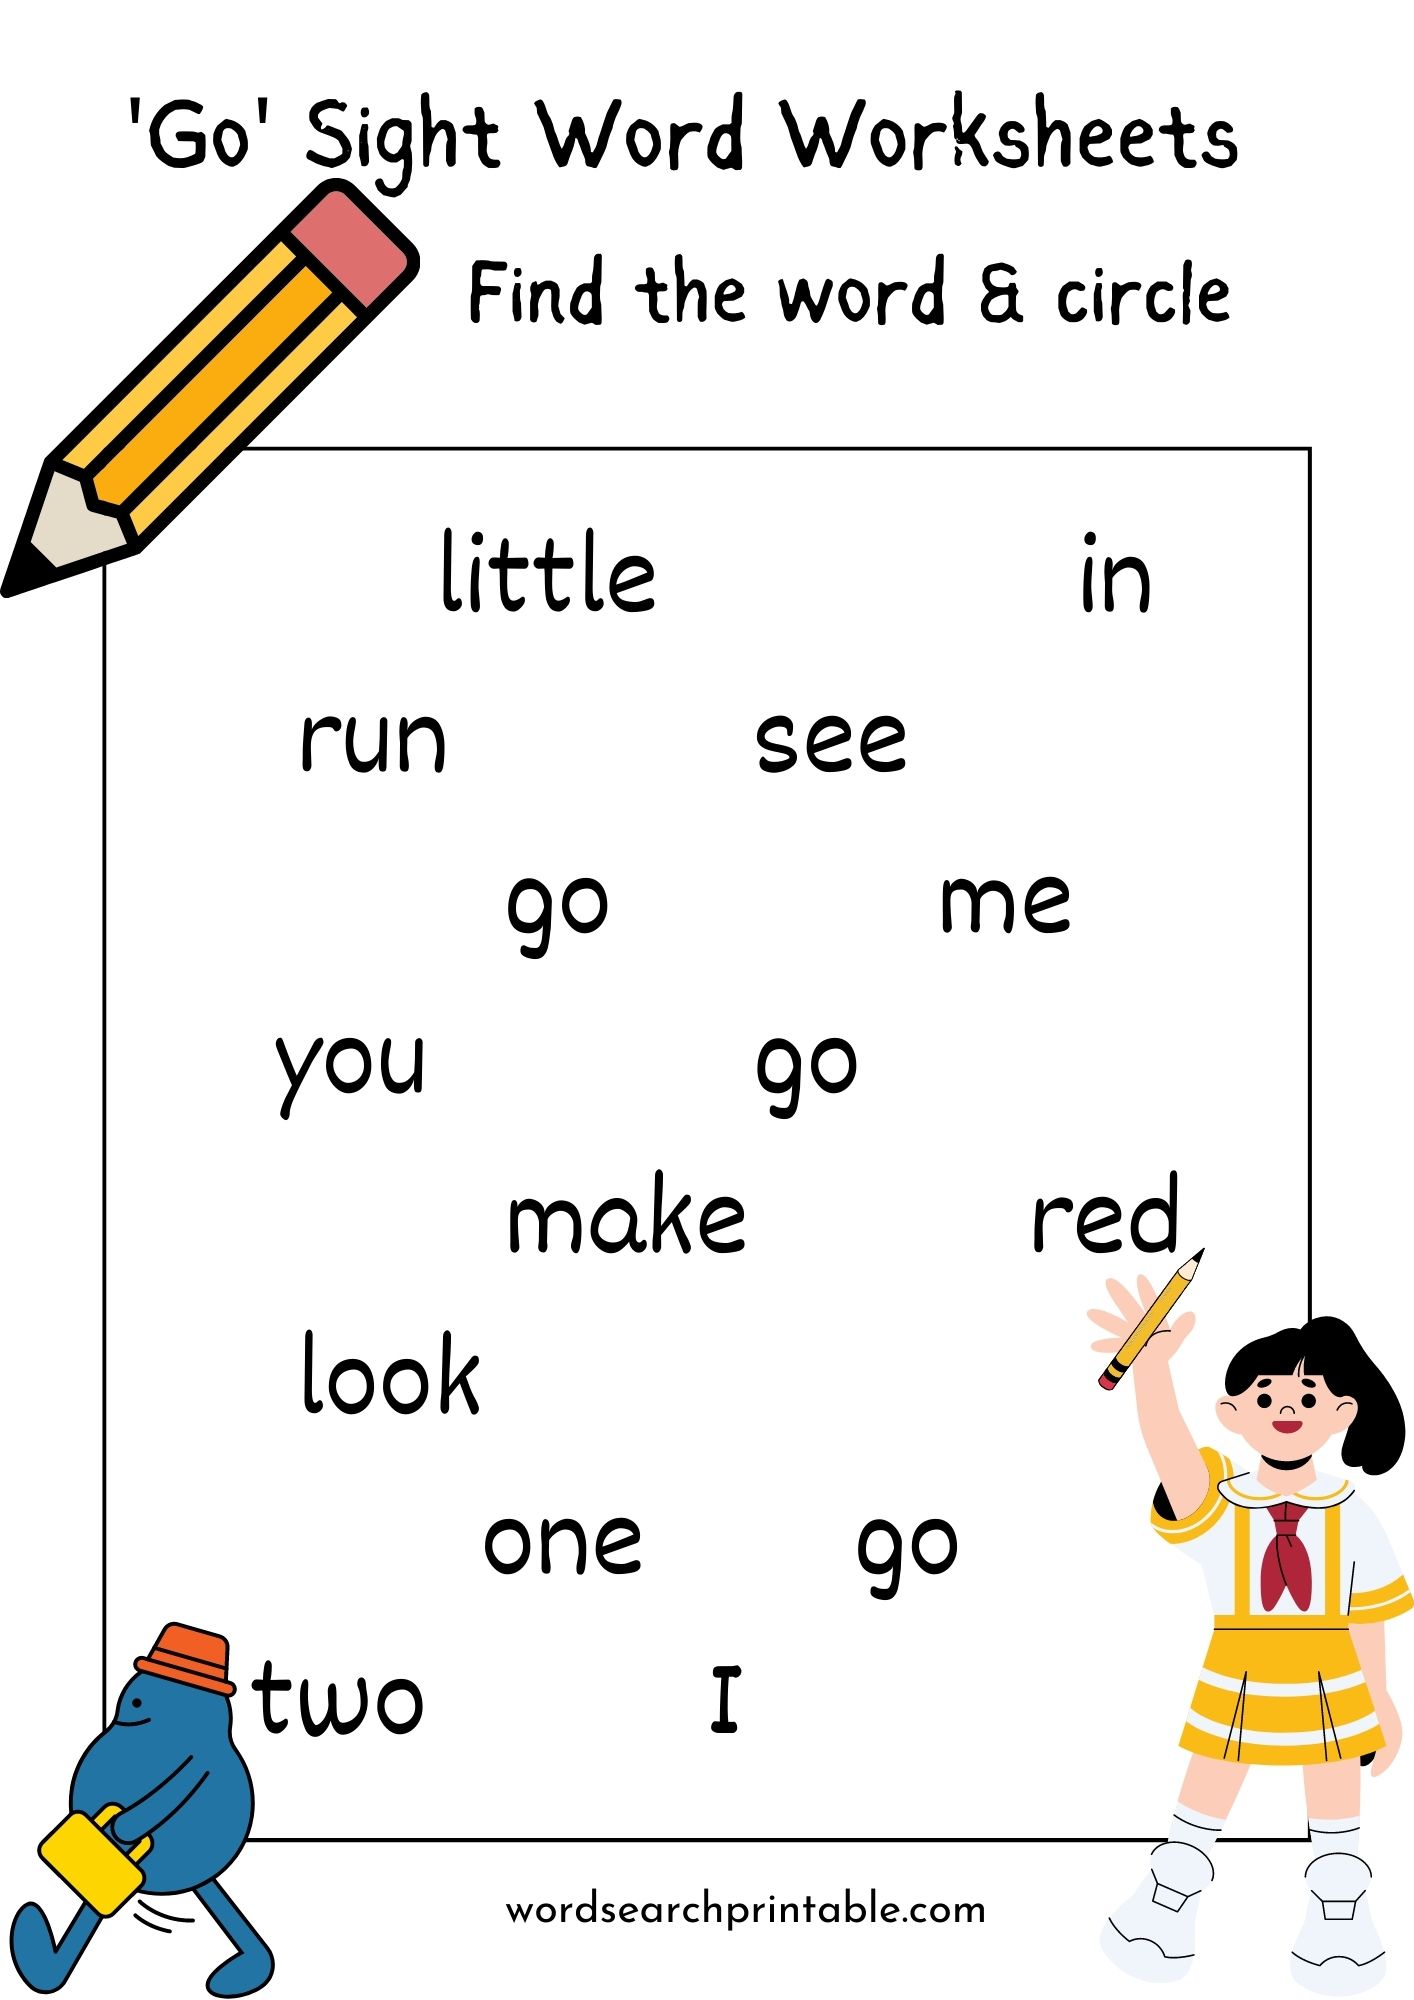 Find the sight word Go and circle it